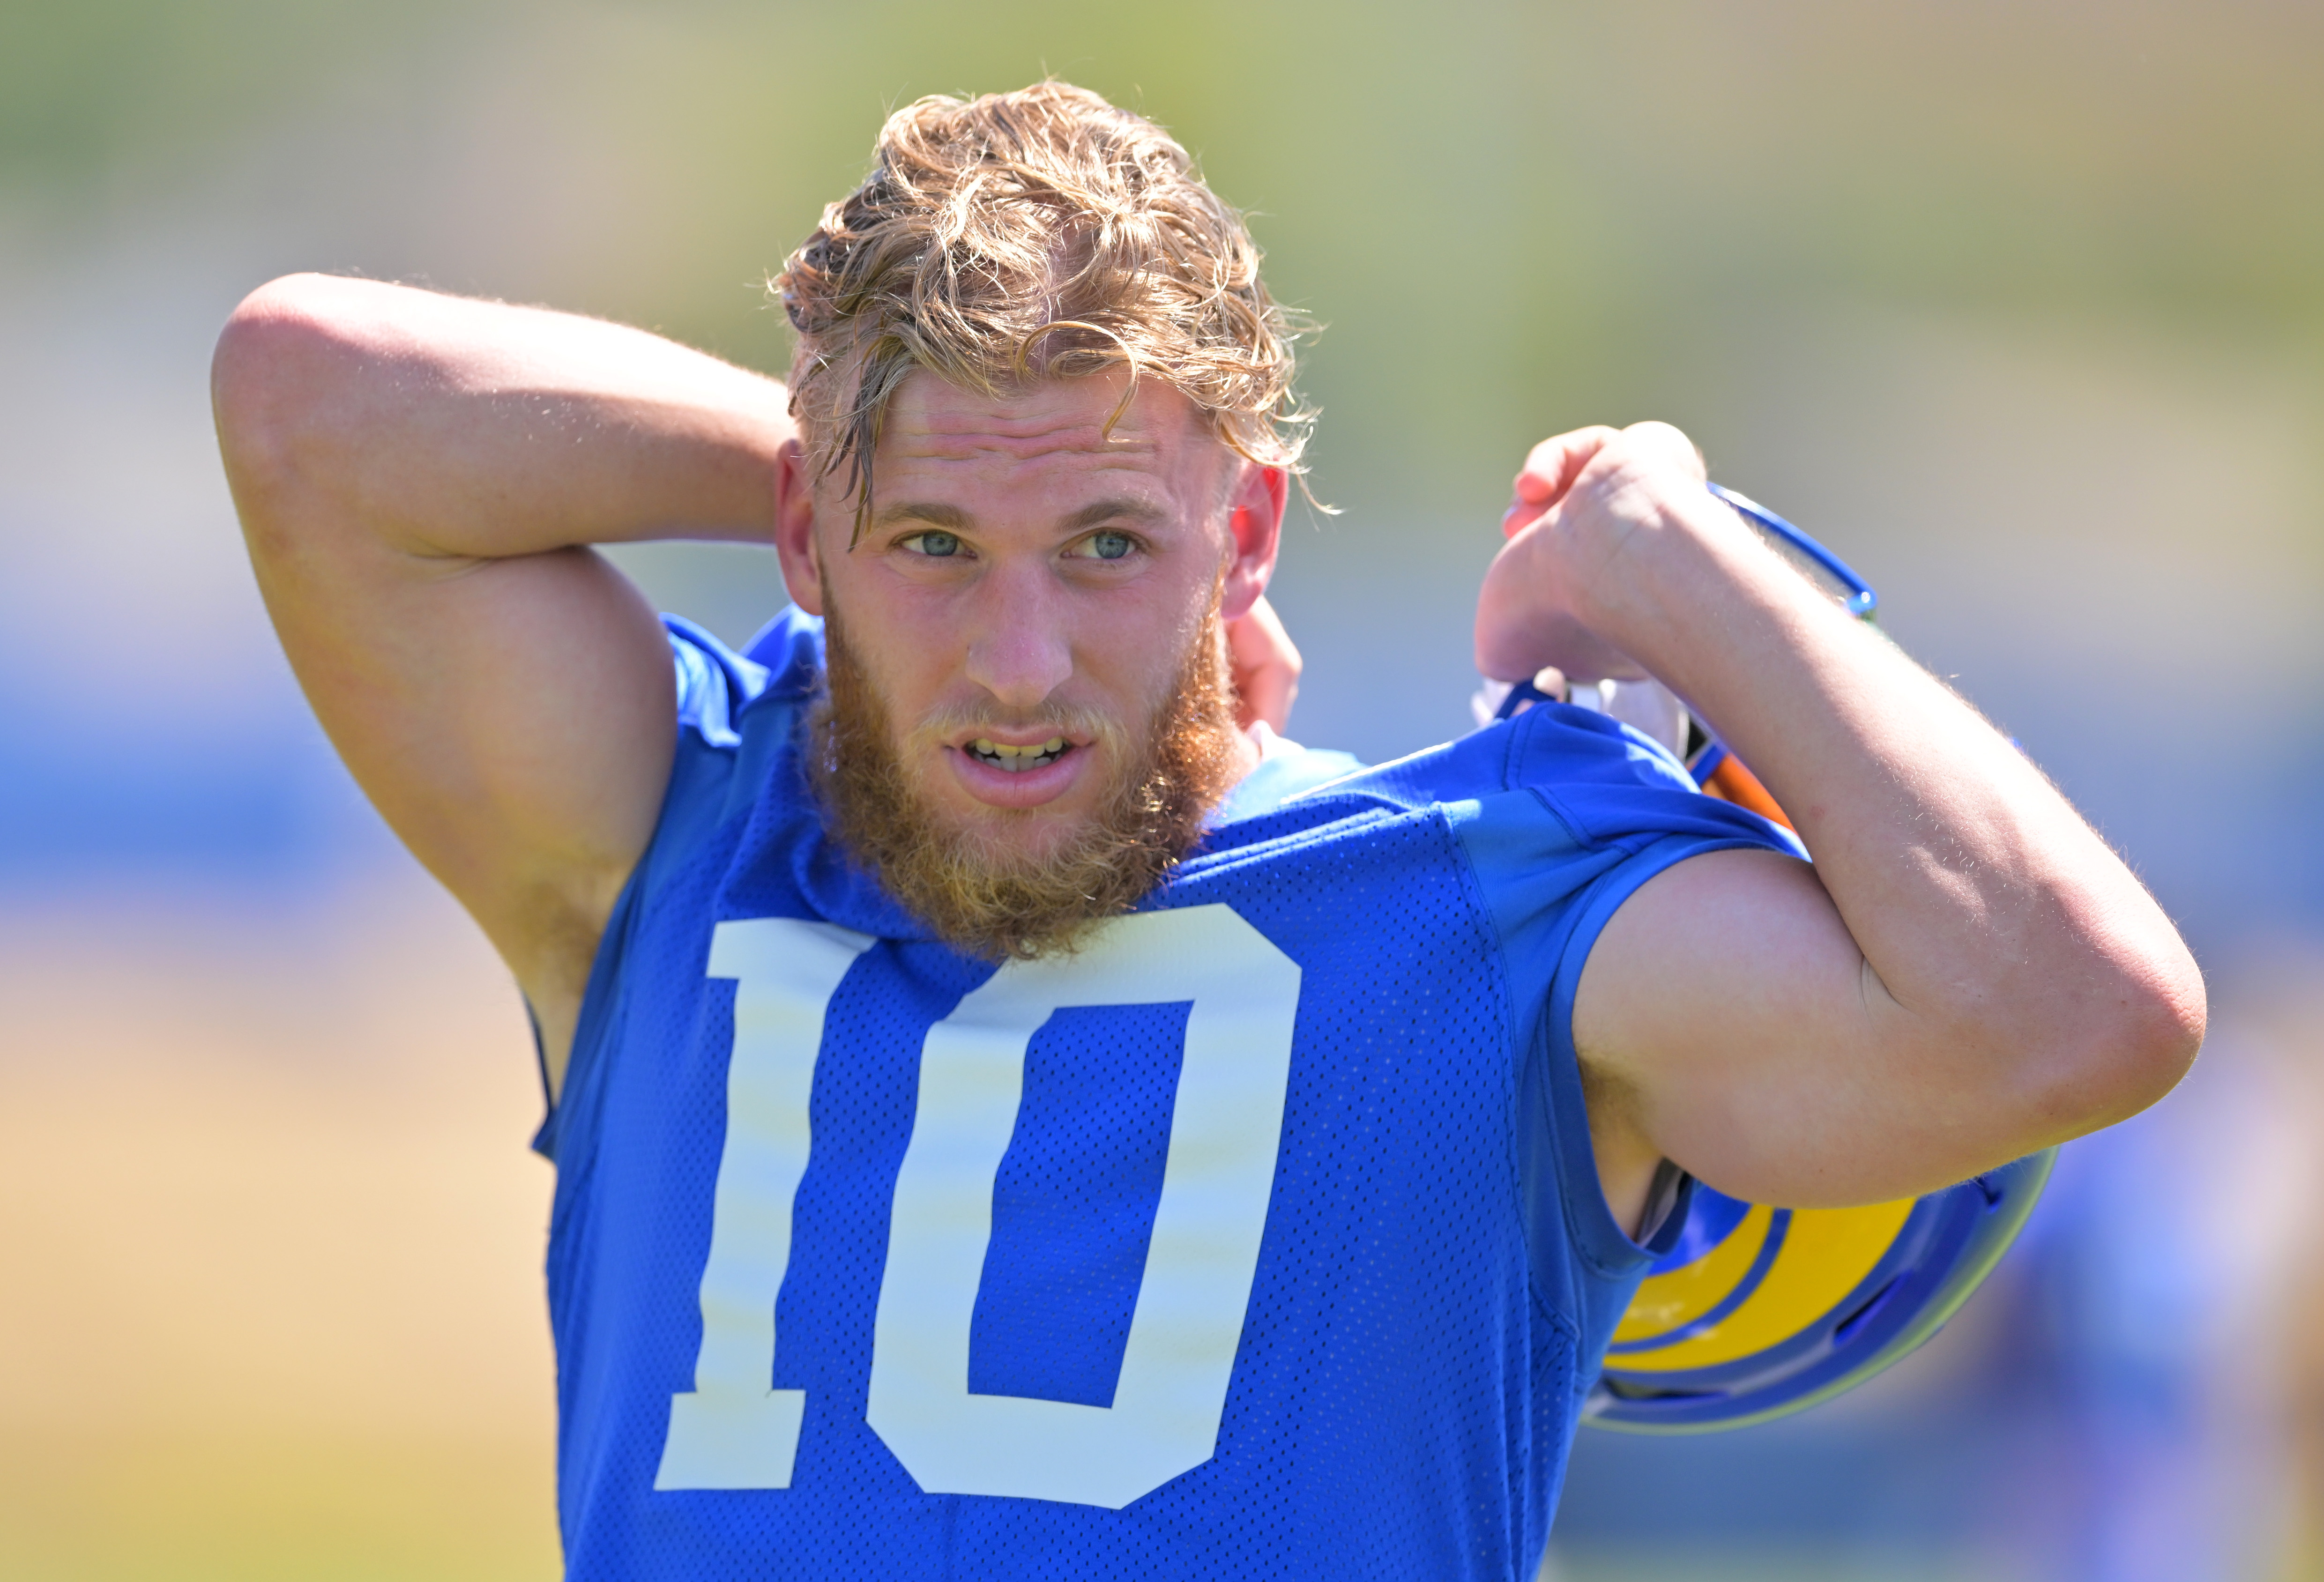 Cooper Kupp #10 of the Los Angeles Rams takes off his jersey following the first day mini camp on June 7, 2022 at the team’s facility at California Lutheran University in Thousand Oaks, California.